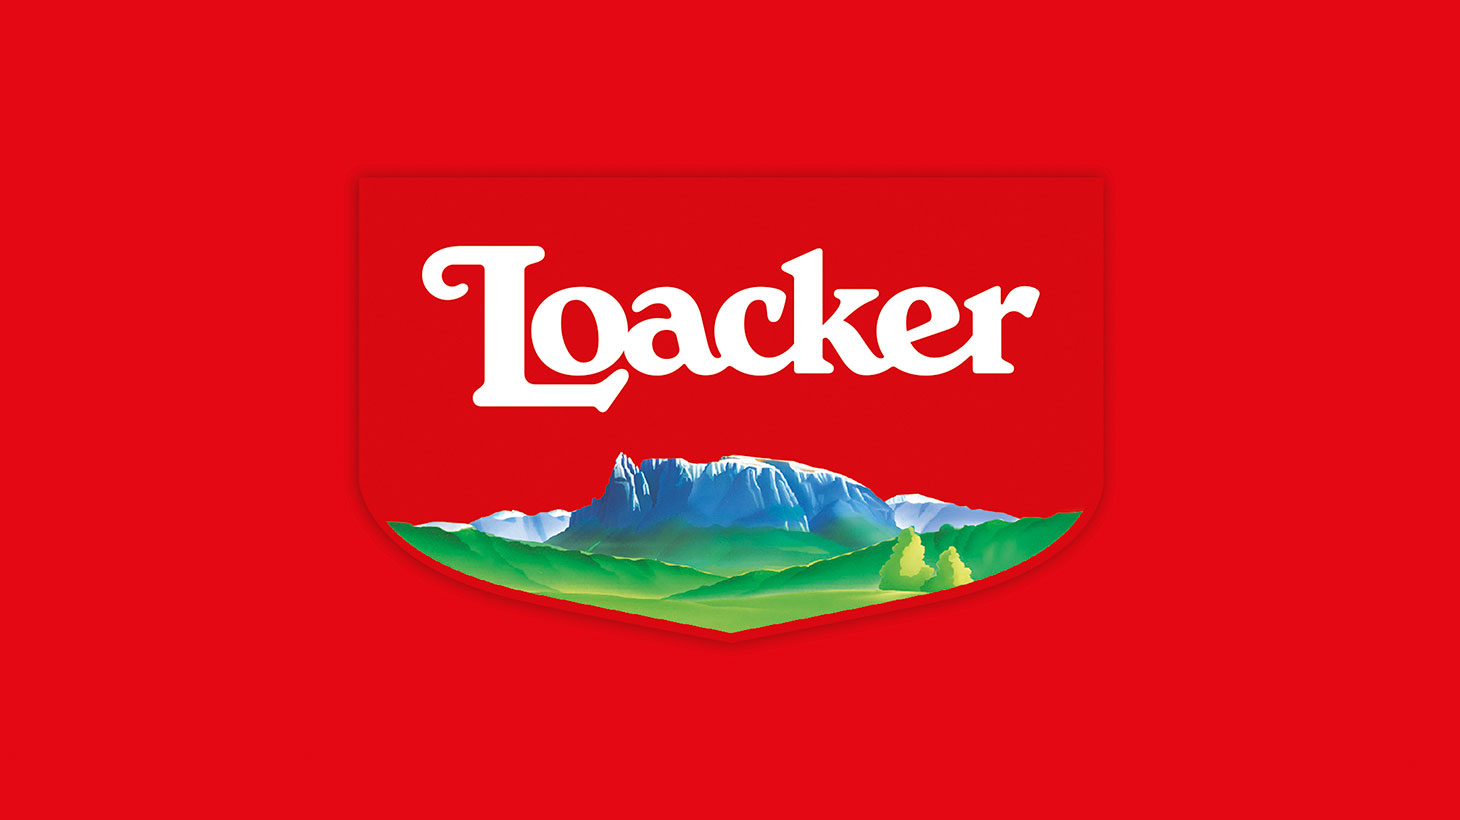 Spider Agency Make Changes to Loacker While Helping Them to Remain Themselves